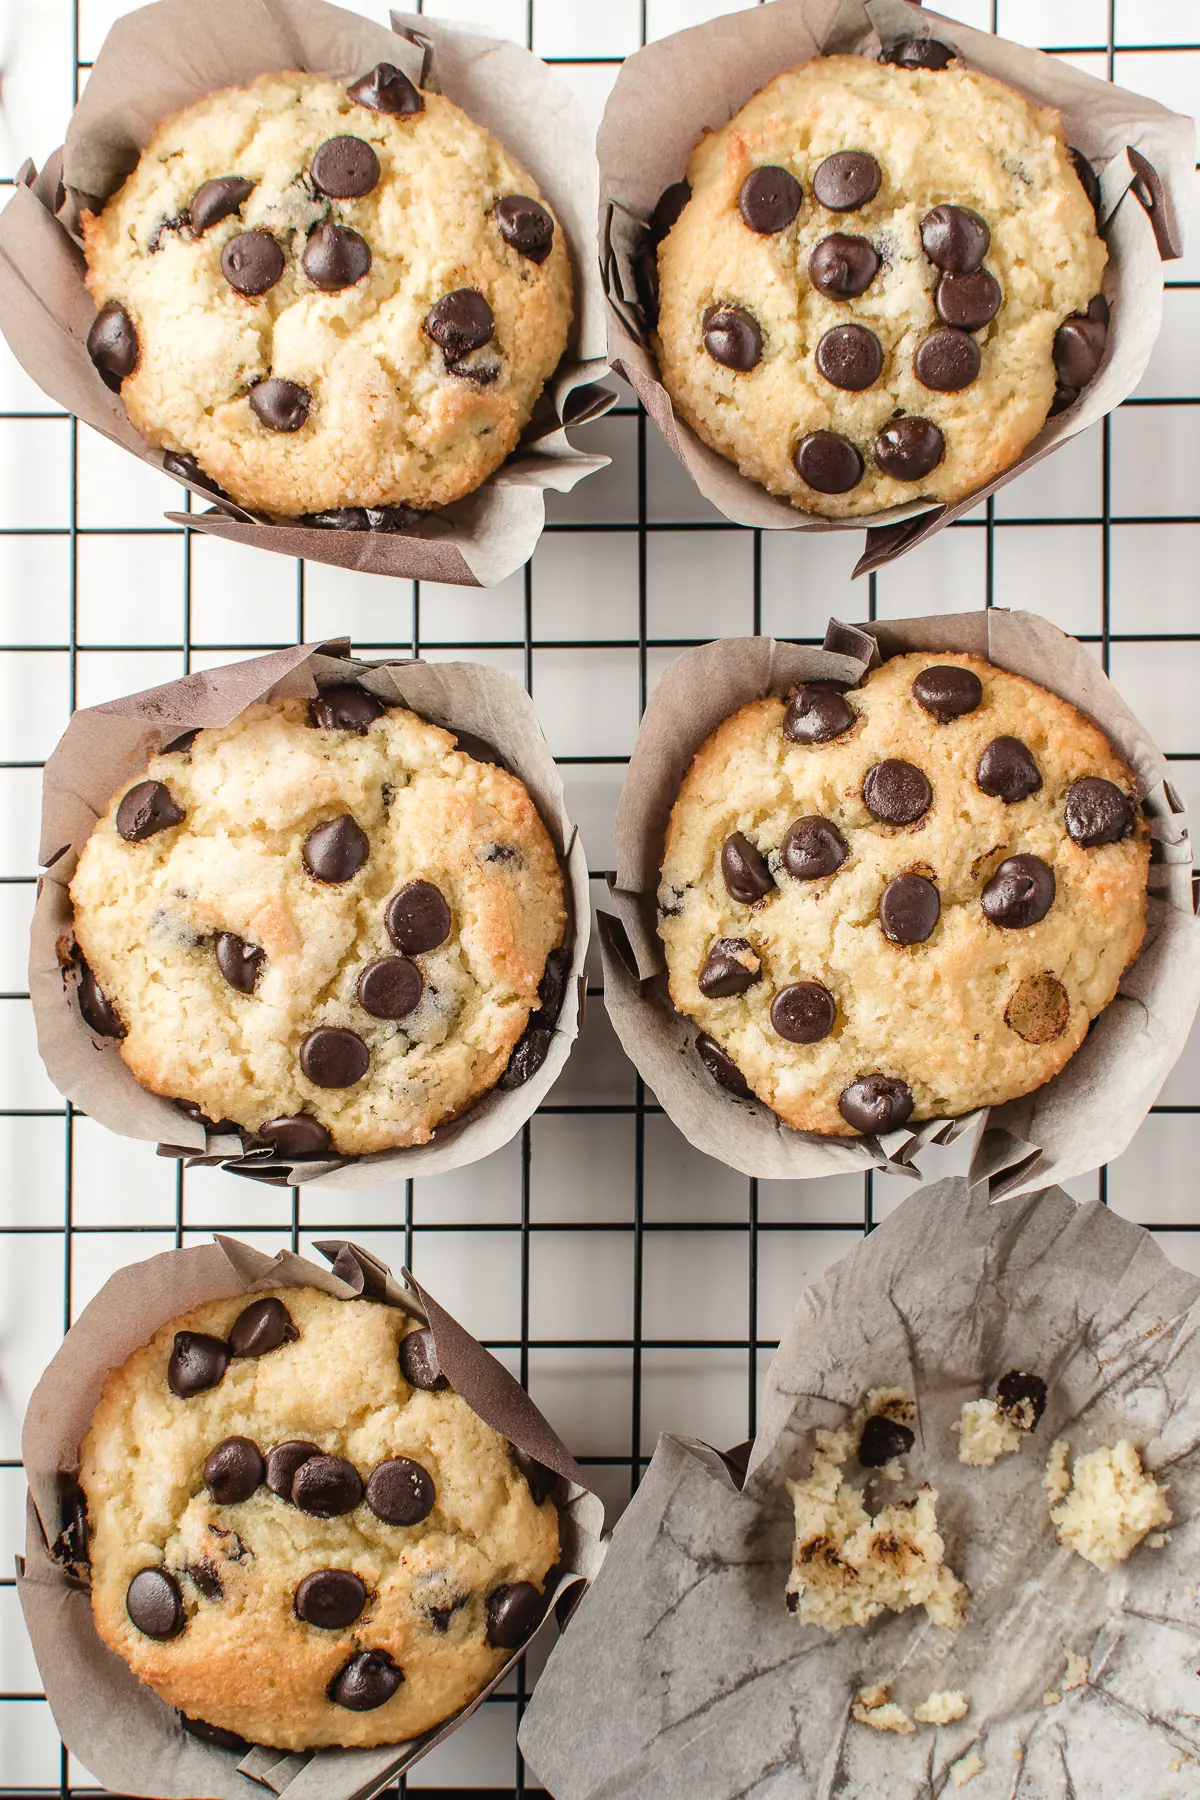 6 bakery style chocolate chip muffins on a black grid cooling rack with one muffin missing leaving only crumbs behind. 